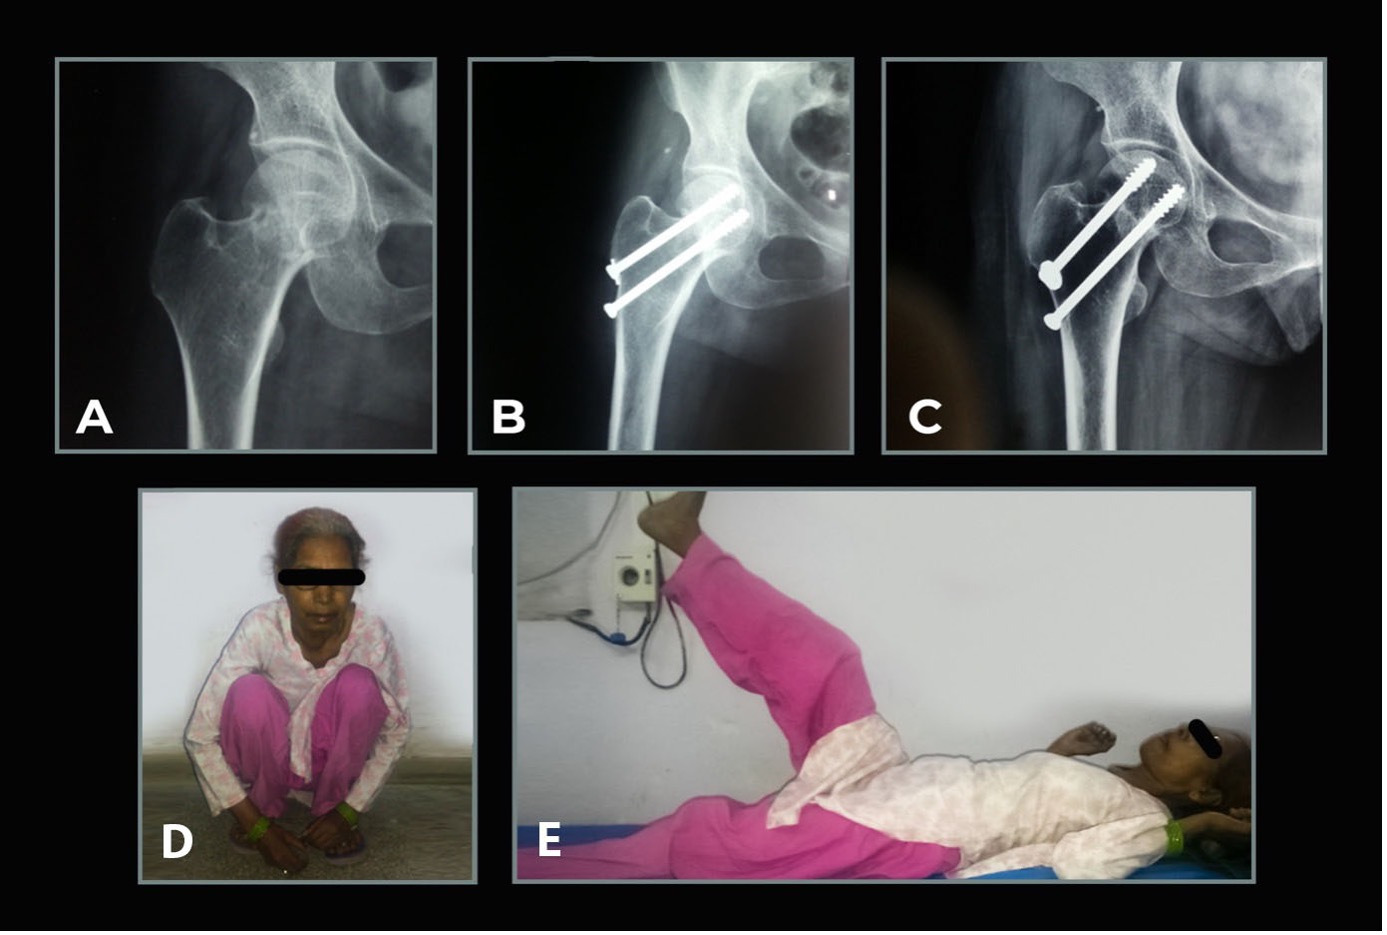 Fig. 1 
            Clinical case of cannulated compression screw (CCS) technique. a) Preoperative AP radiograph showing displaced Garden type 3 fracture. b) Postoperative radiograph showing closed reduction and internal fixation with CCS. c) Two-year radiograph shows healing of fracture. Femoral head shows no signs of osteonecrosis. d) and e) Patient capabilities at two-year follow-up (full squatting and straight leg raise).
          